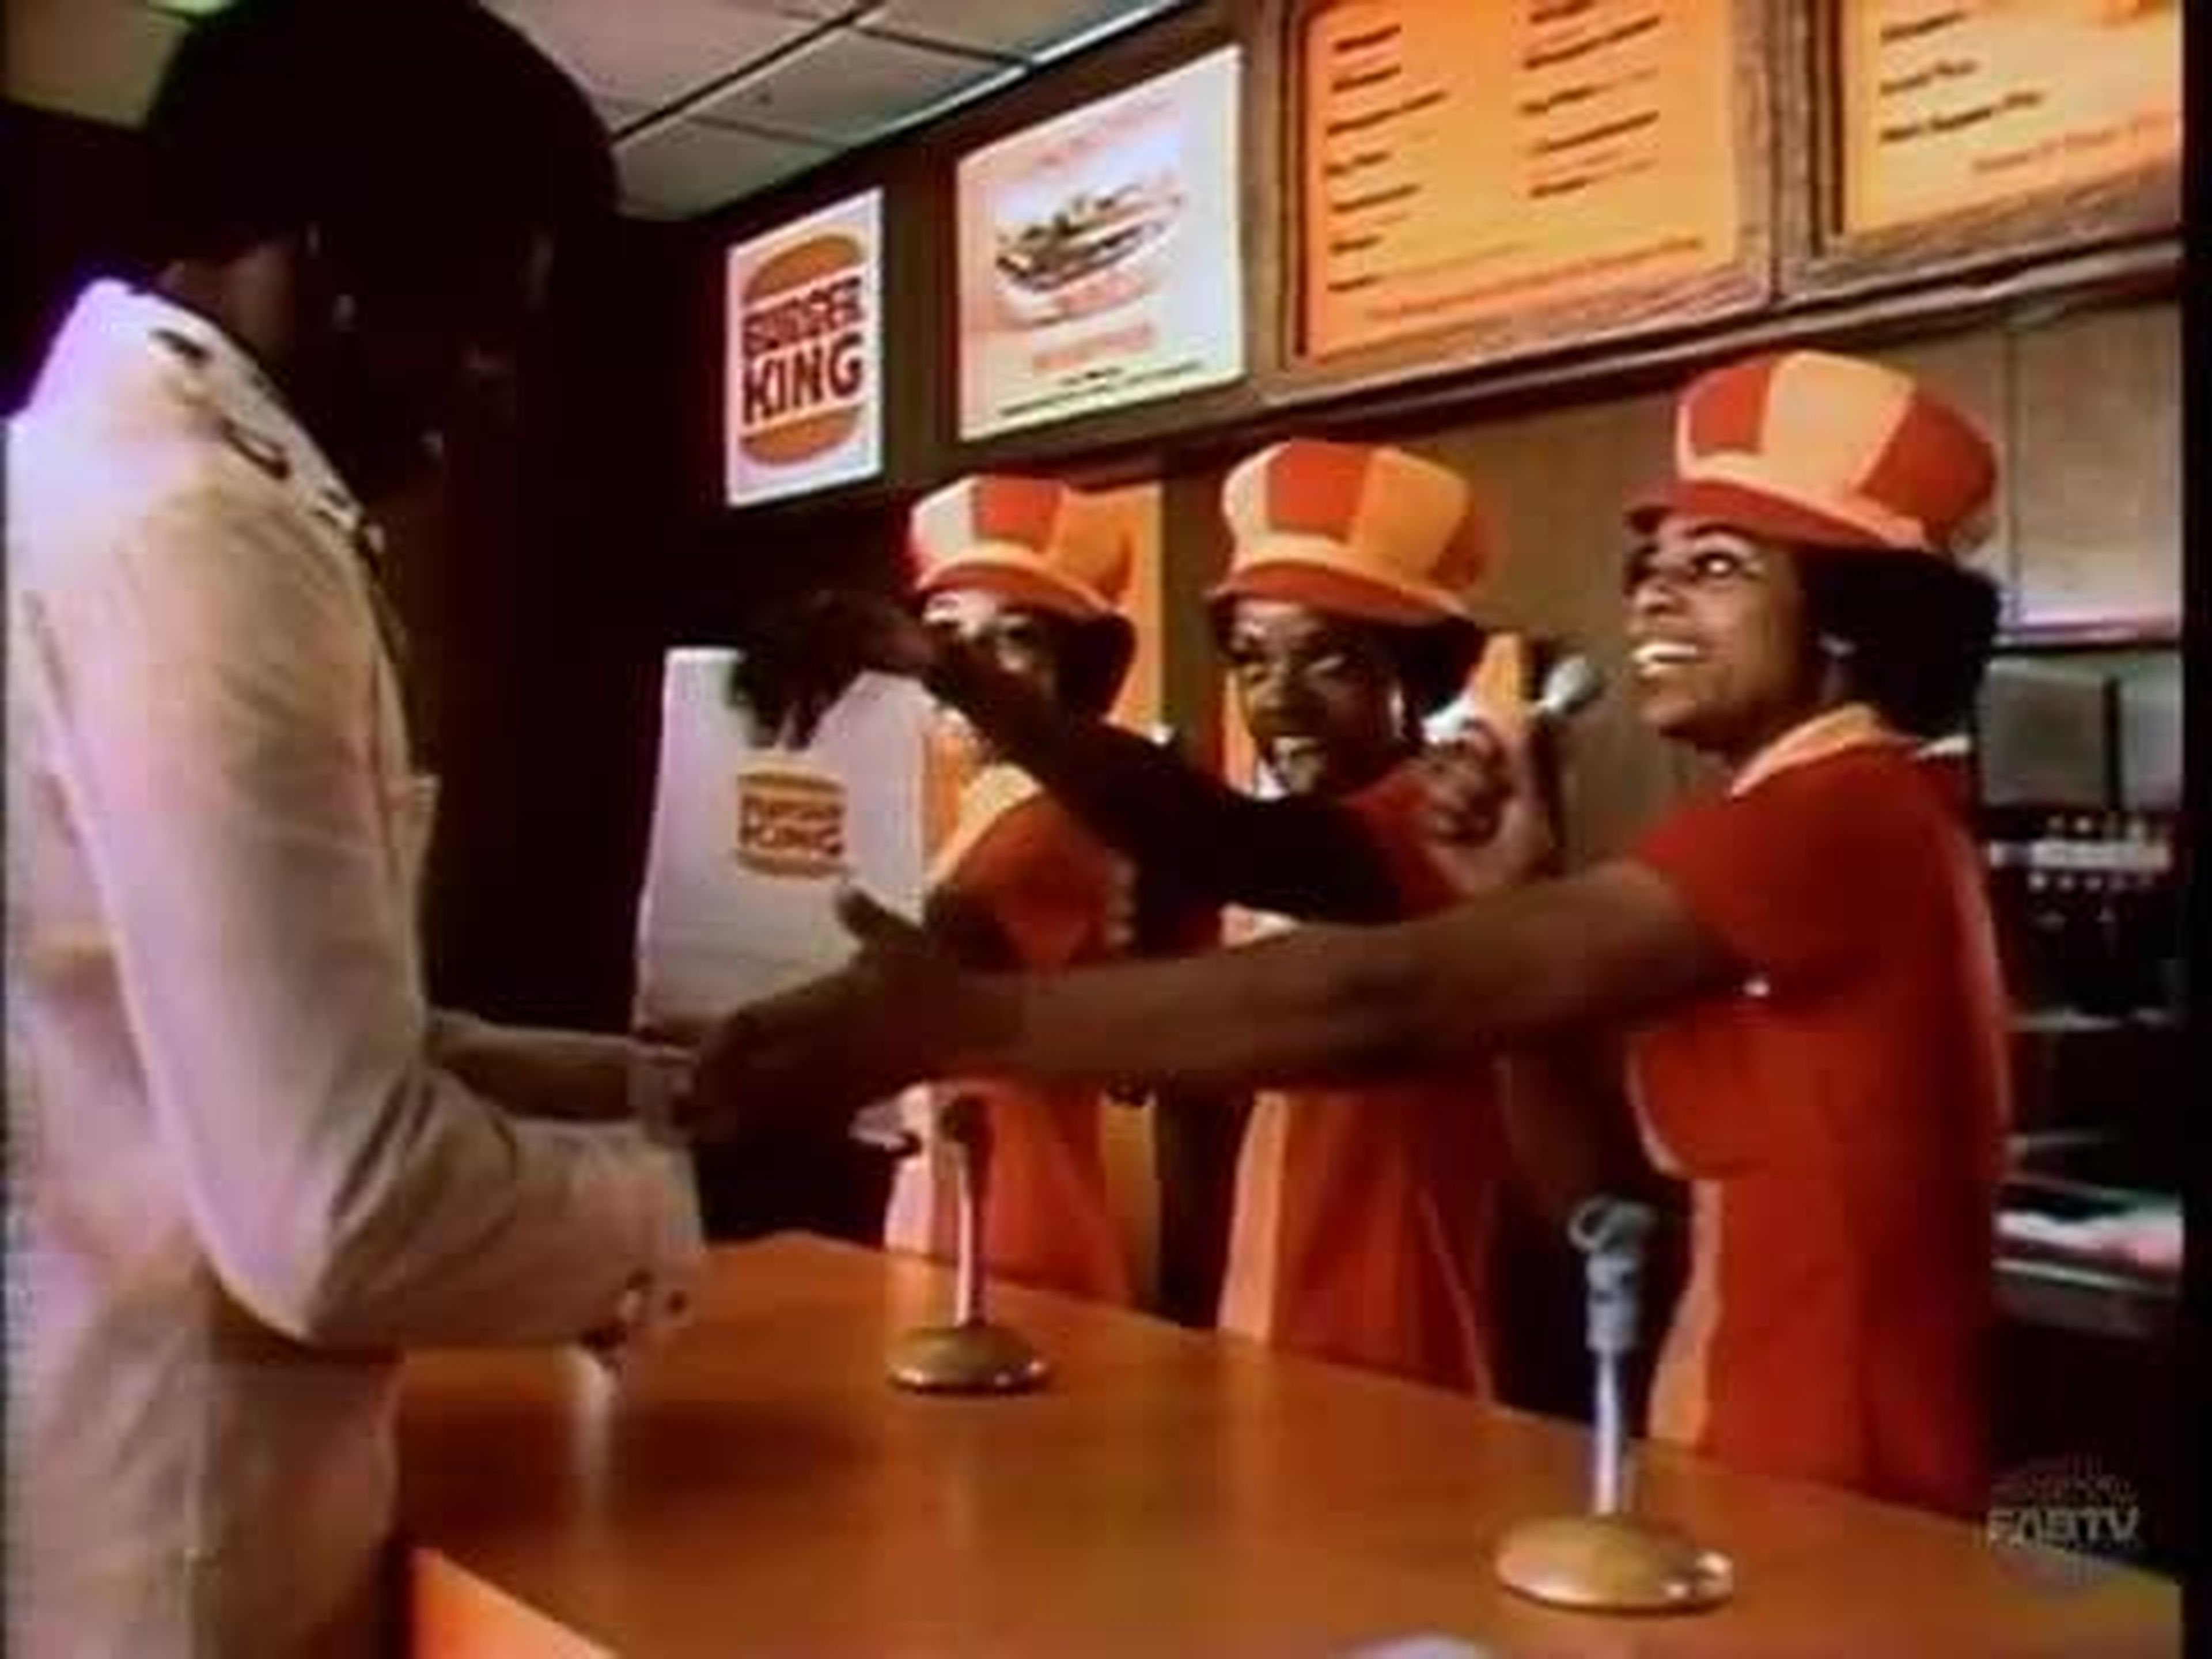 1974 — Burger King ran an ad spot in 1974, which appeared to feature two different versions geared toward its white and black customers, respectively. For white audiences, 'Hold the pickle, hold the lettuce' was sung by a green